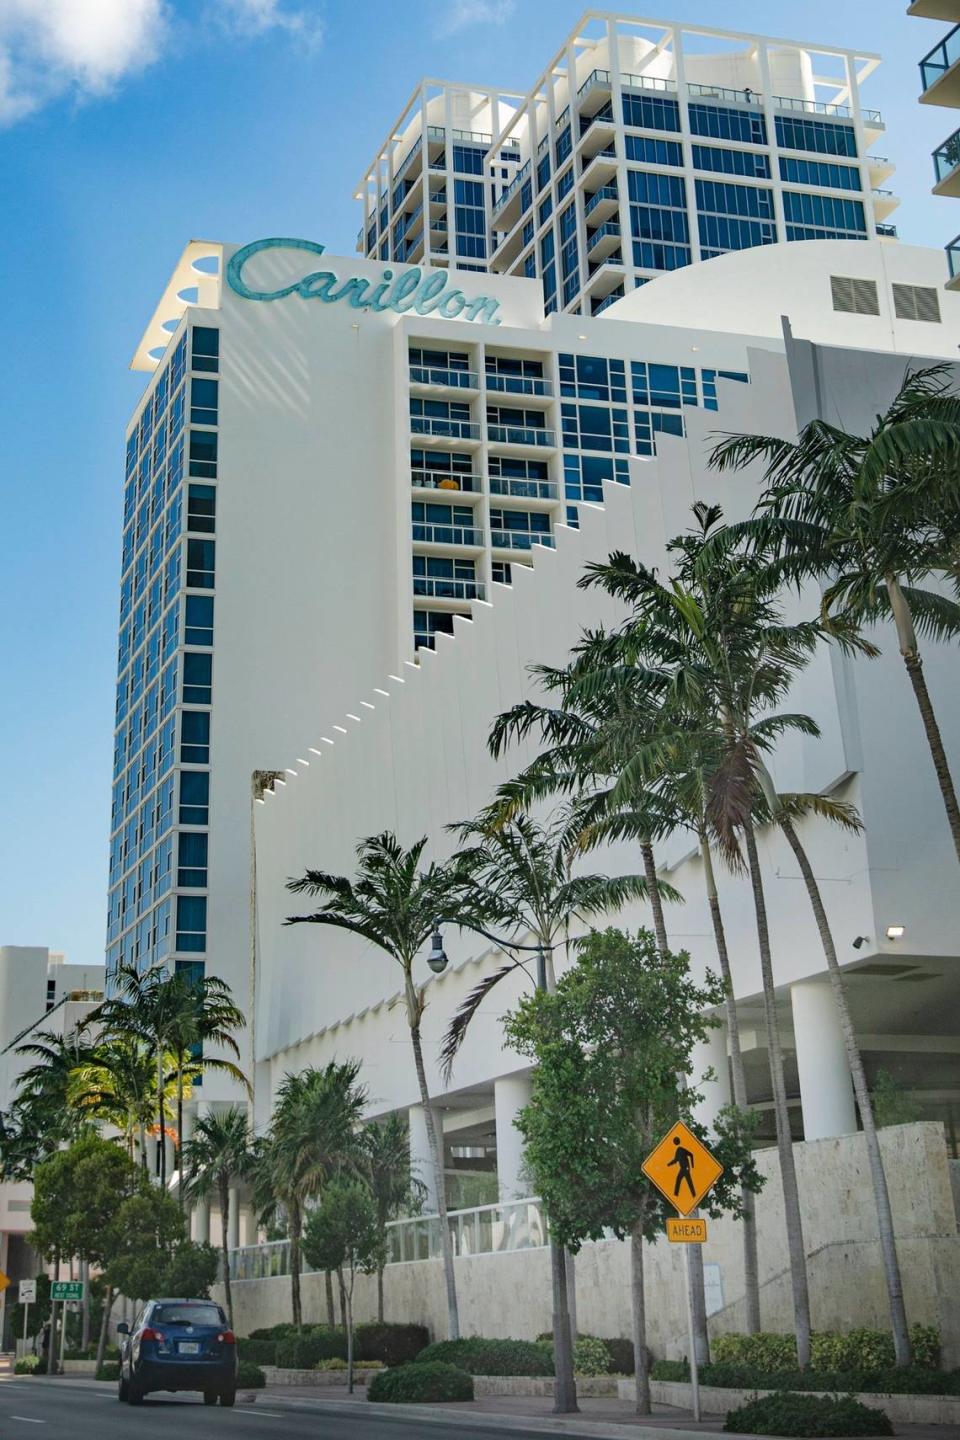 The Carillon Hotel is seen from Collins Avenue in Miami Beach on July 13, 2022. It is one of numerous historic Art Deco buildings in Miami Beach that would be more difficult to preserve under proposed state legislation.